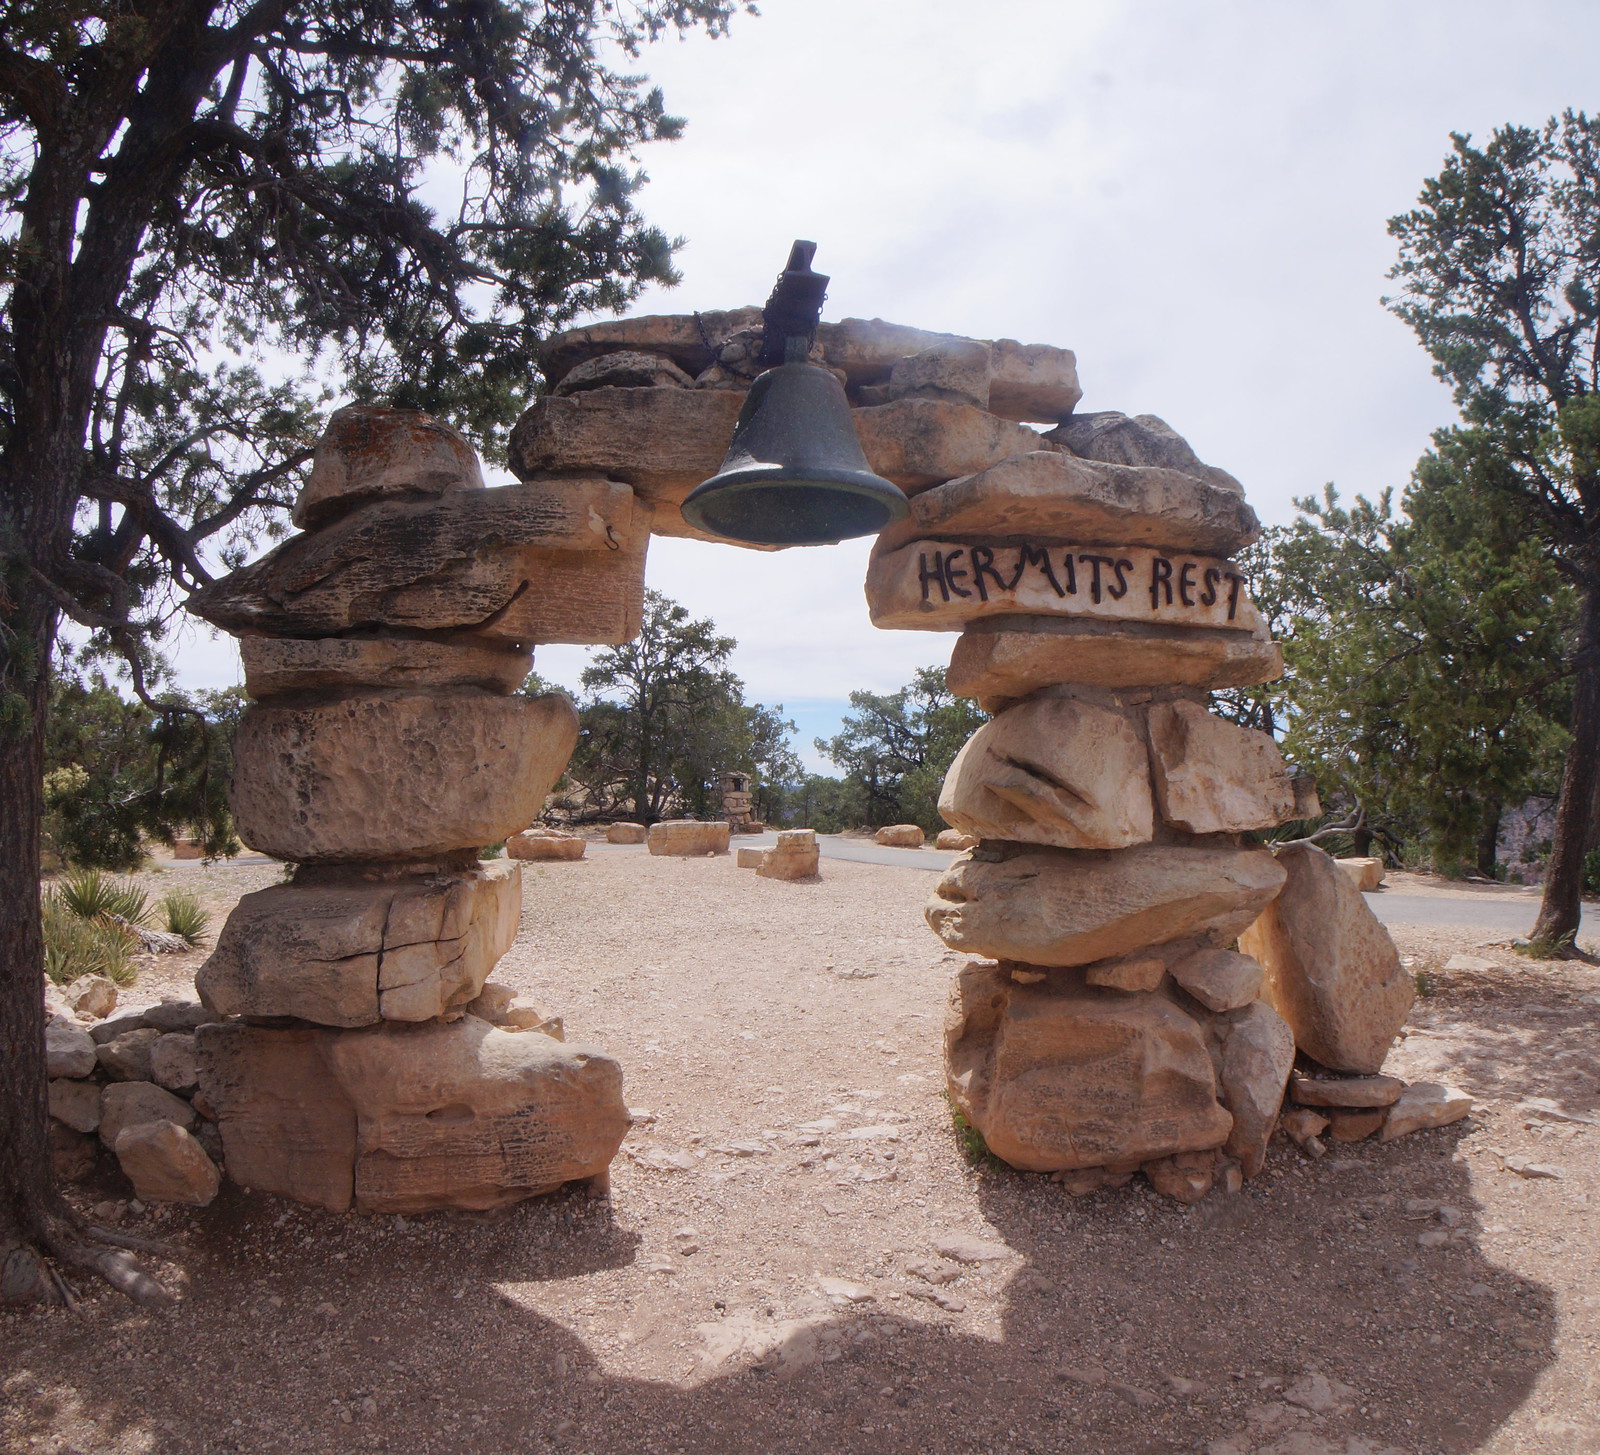 Hermits Rest Archway and Bell at the Grand Canyon